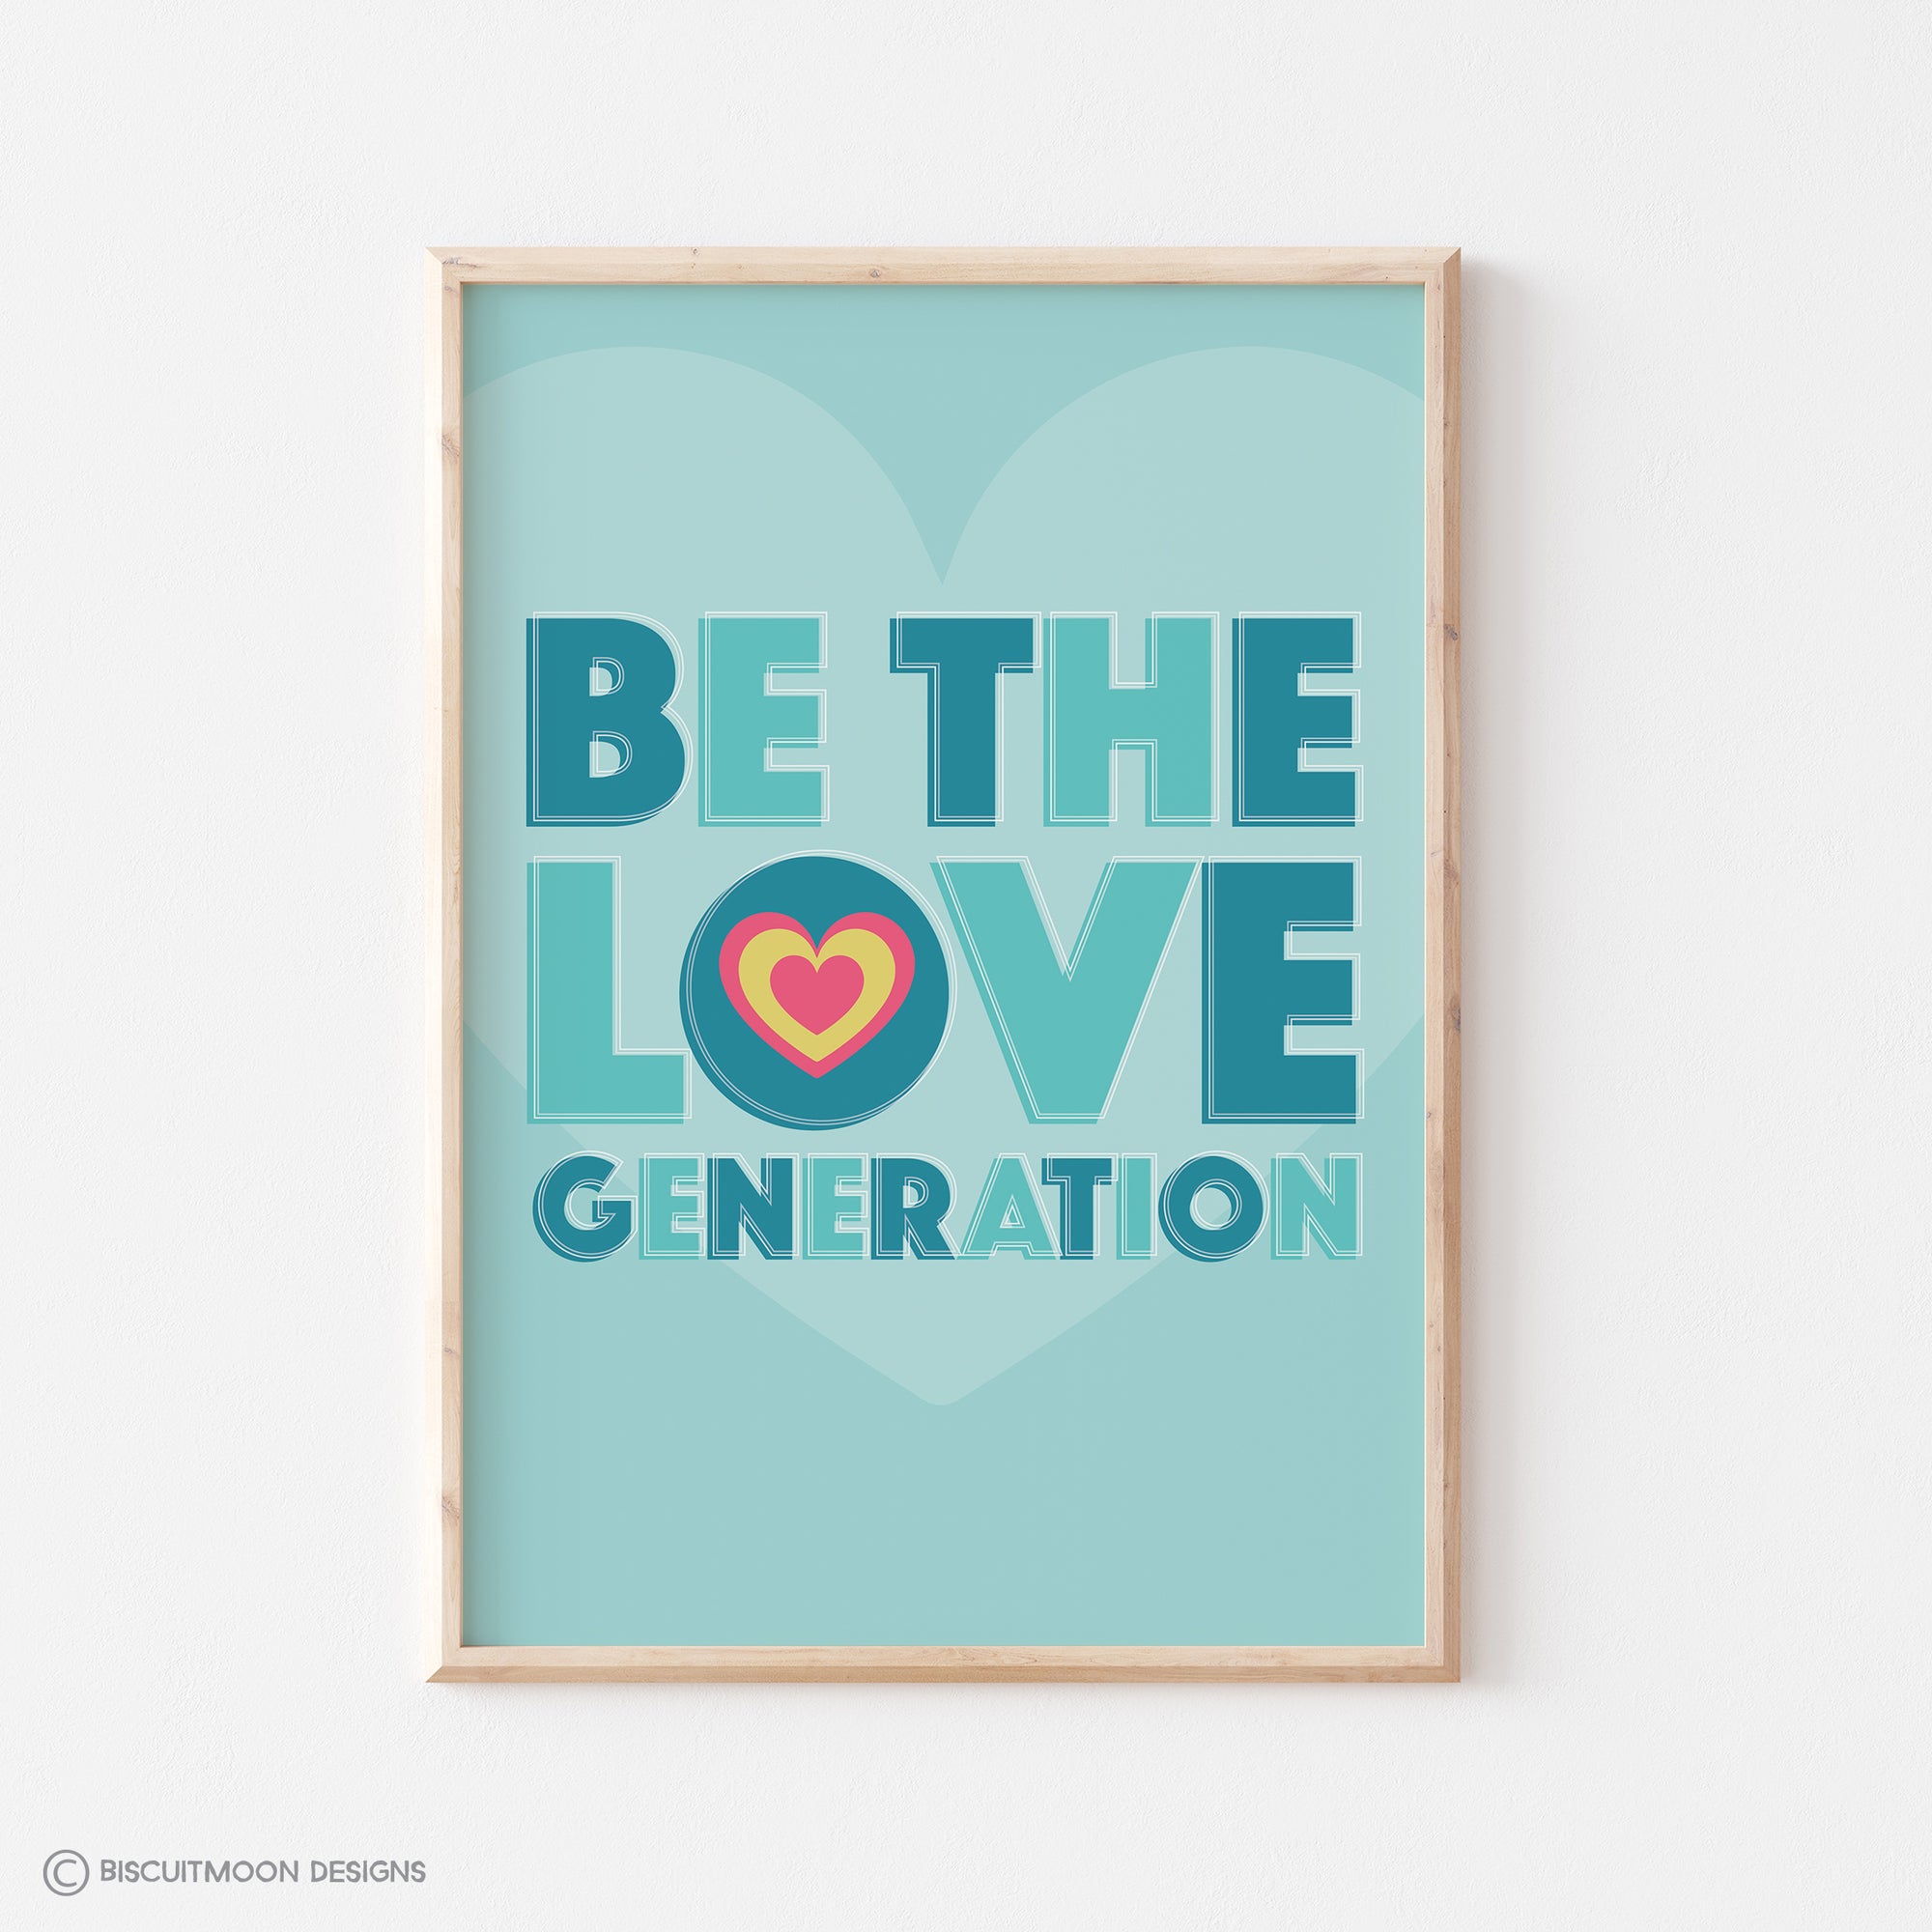 Be the Love Generation Print